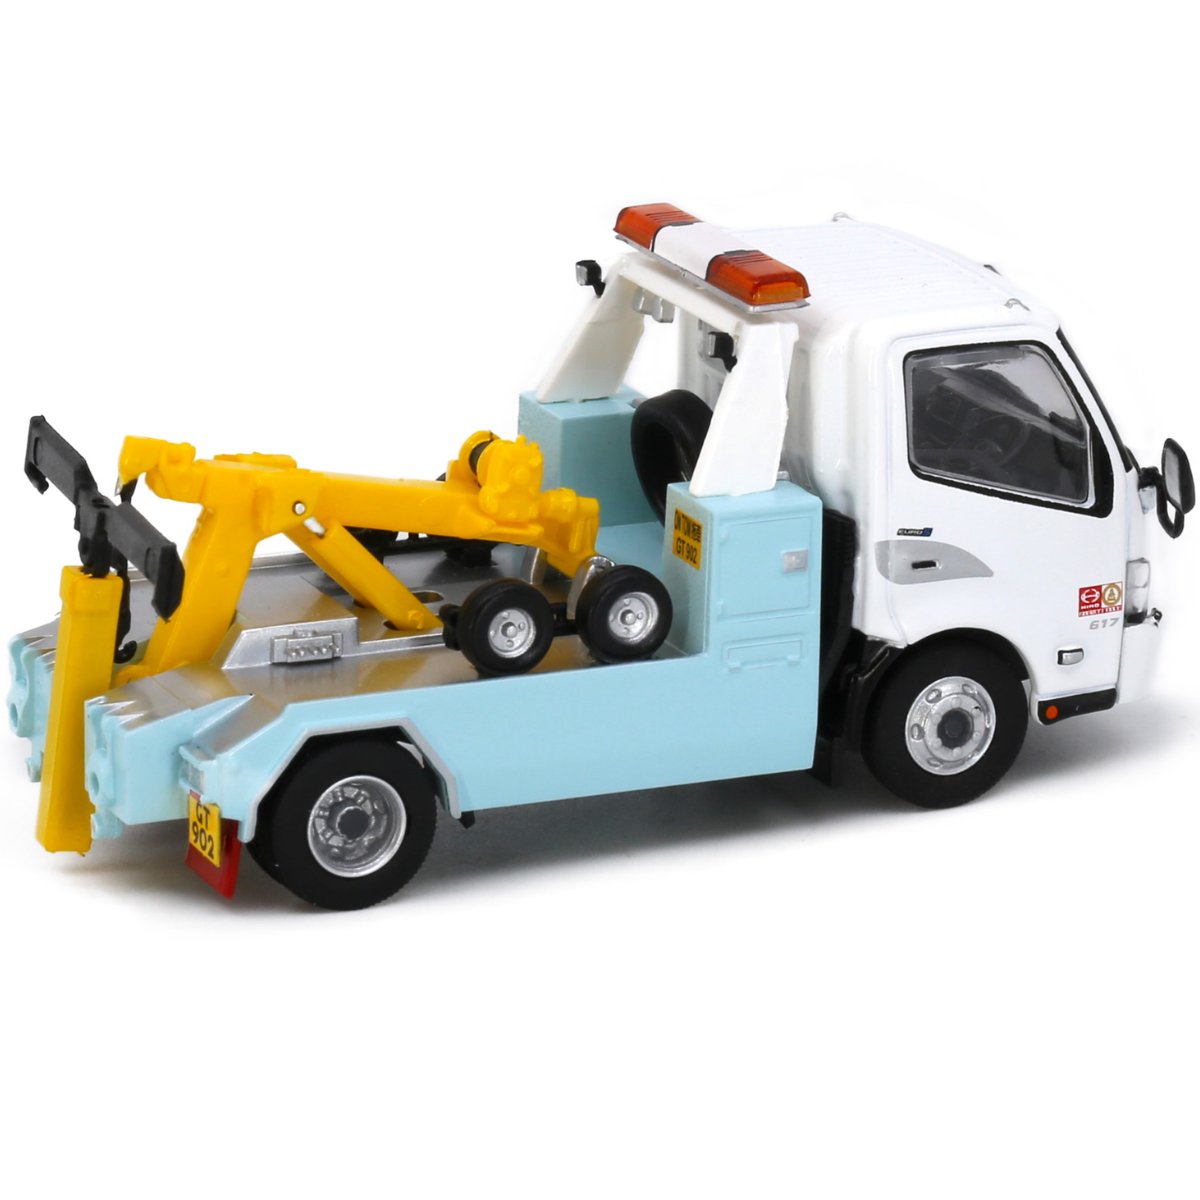 Tiny Models Hino 300 Tow Truck (1:64 Scale) - Phillips Hobbies